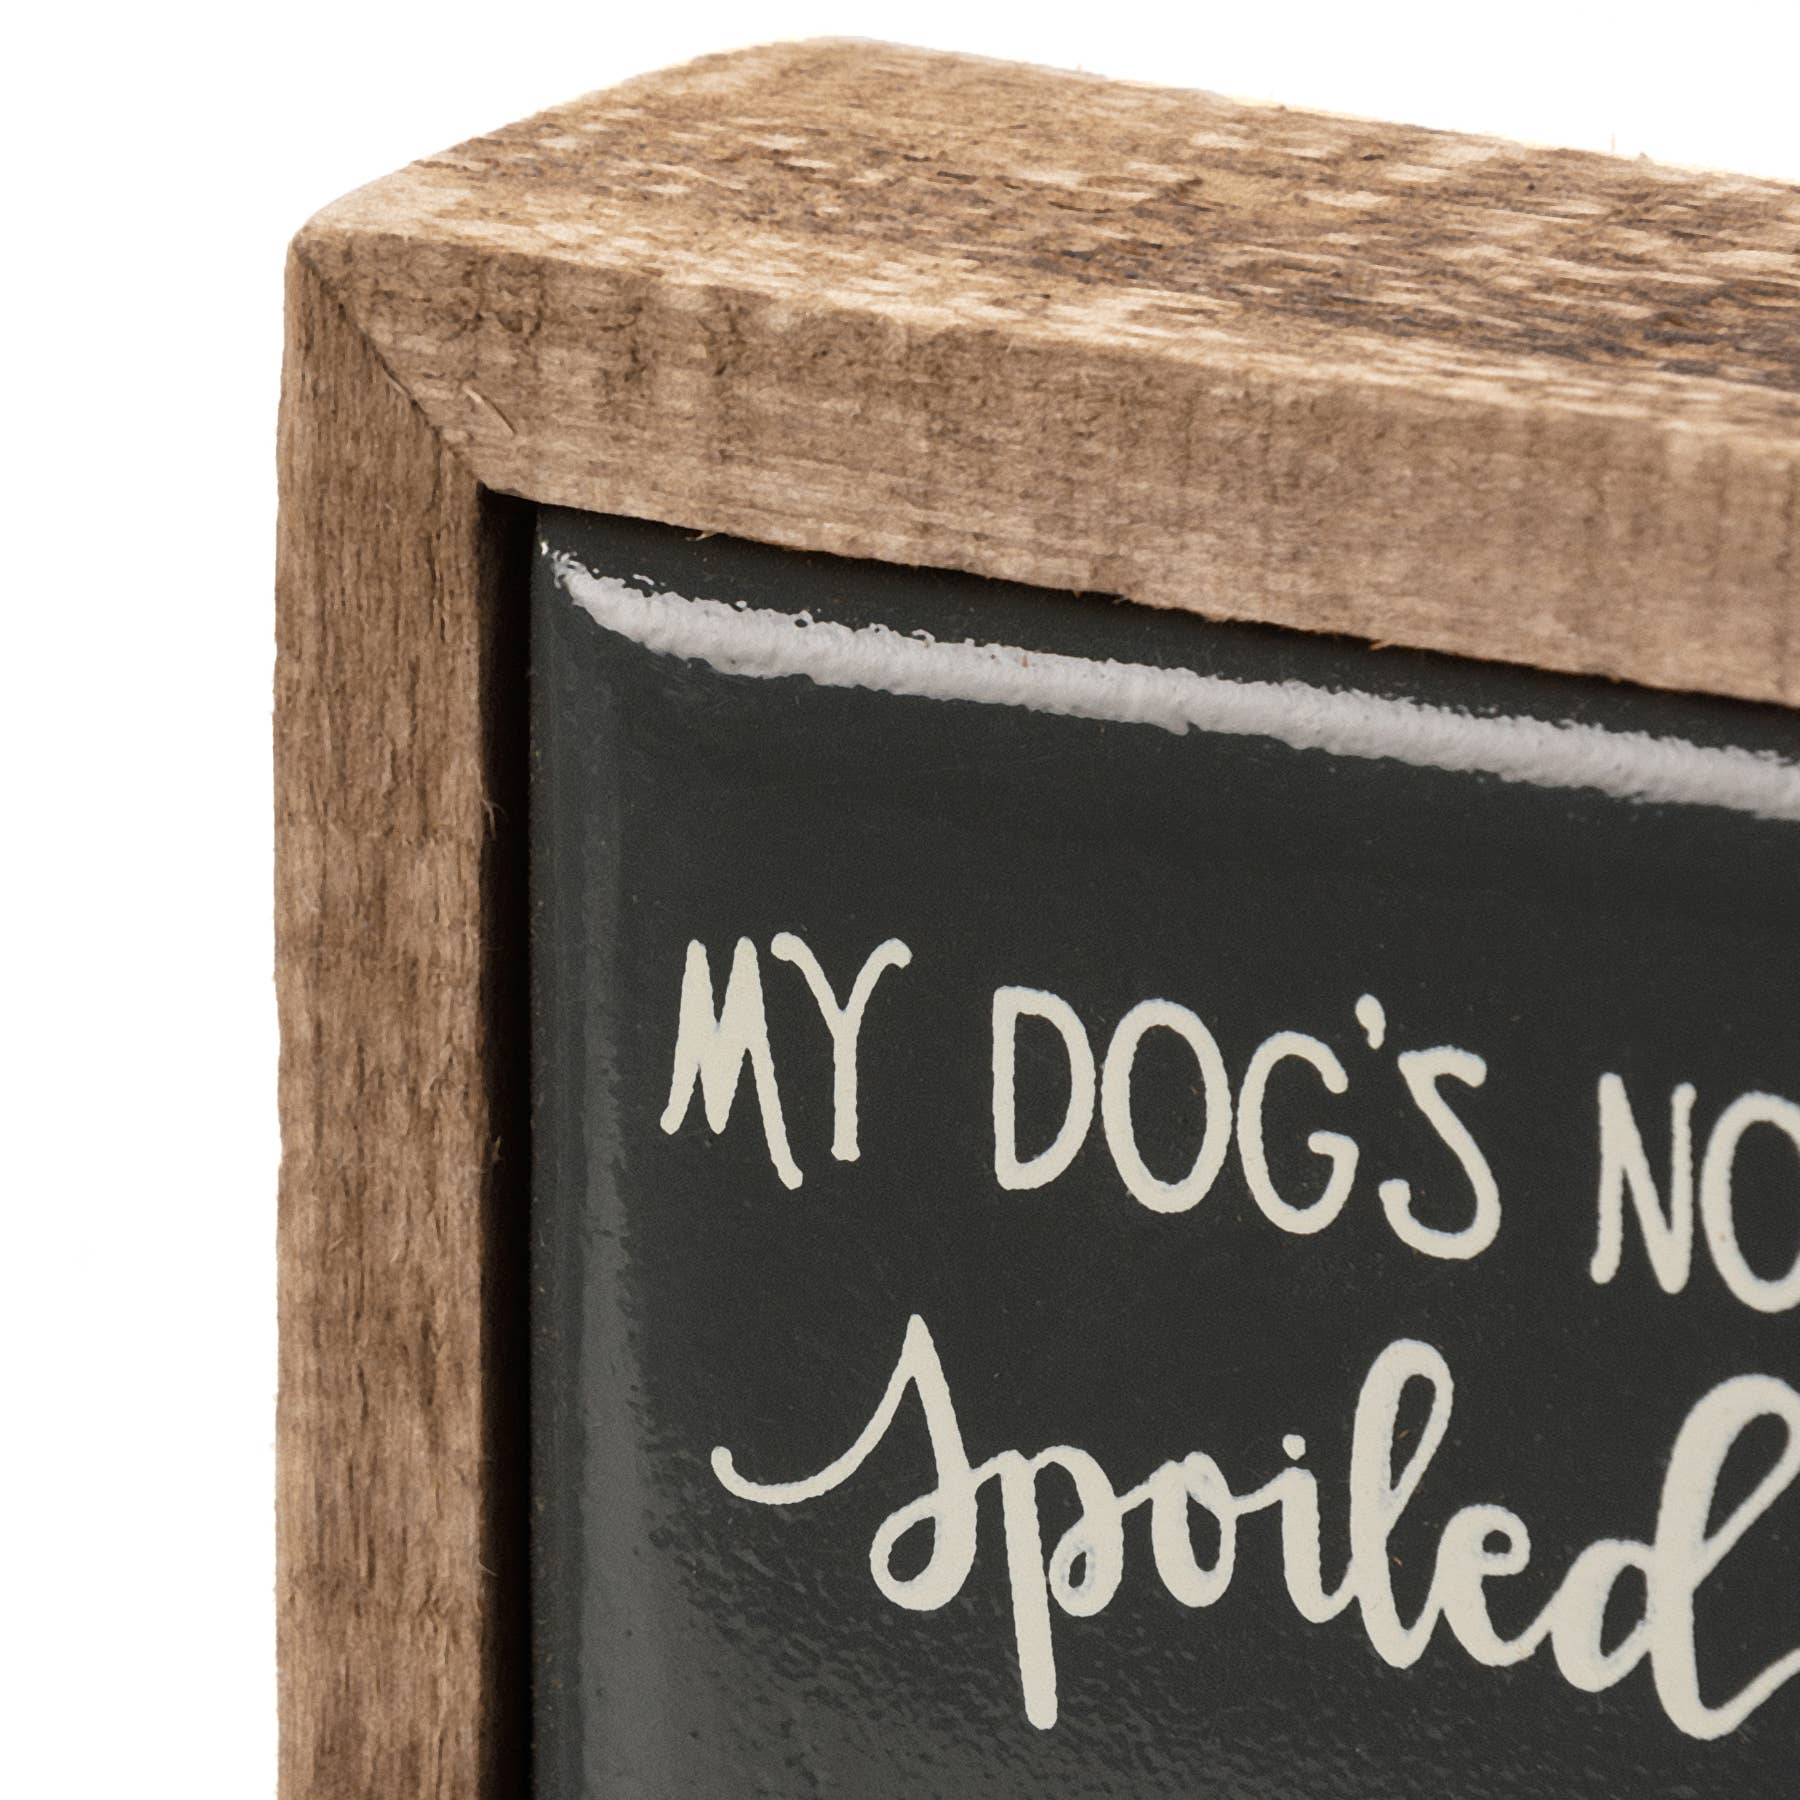 My Dog's Not Spoiled Box Sign Mini